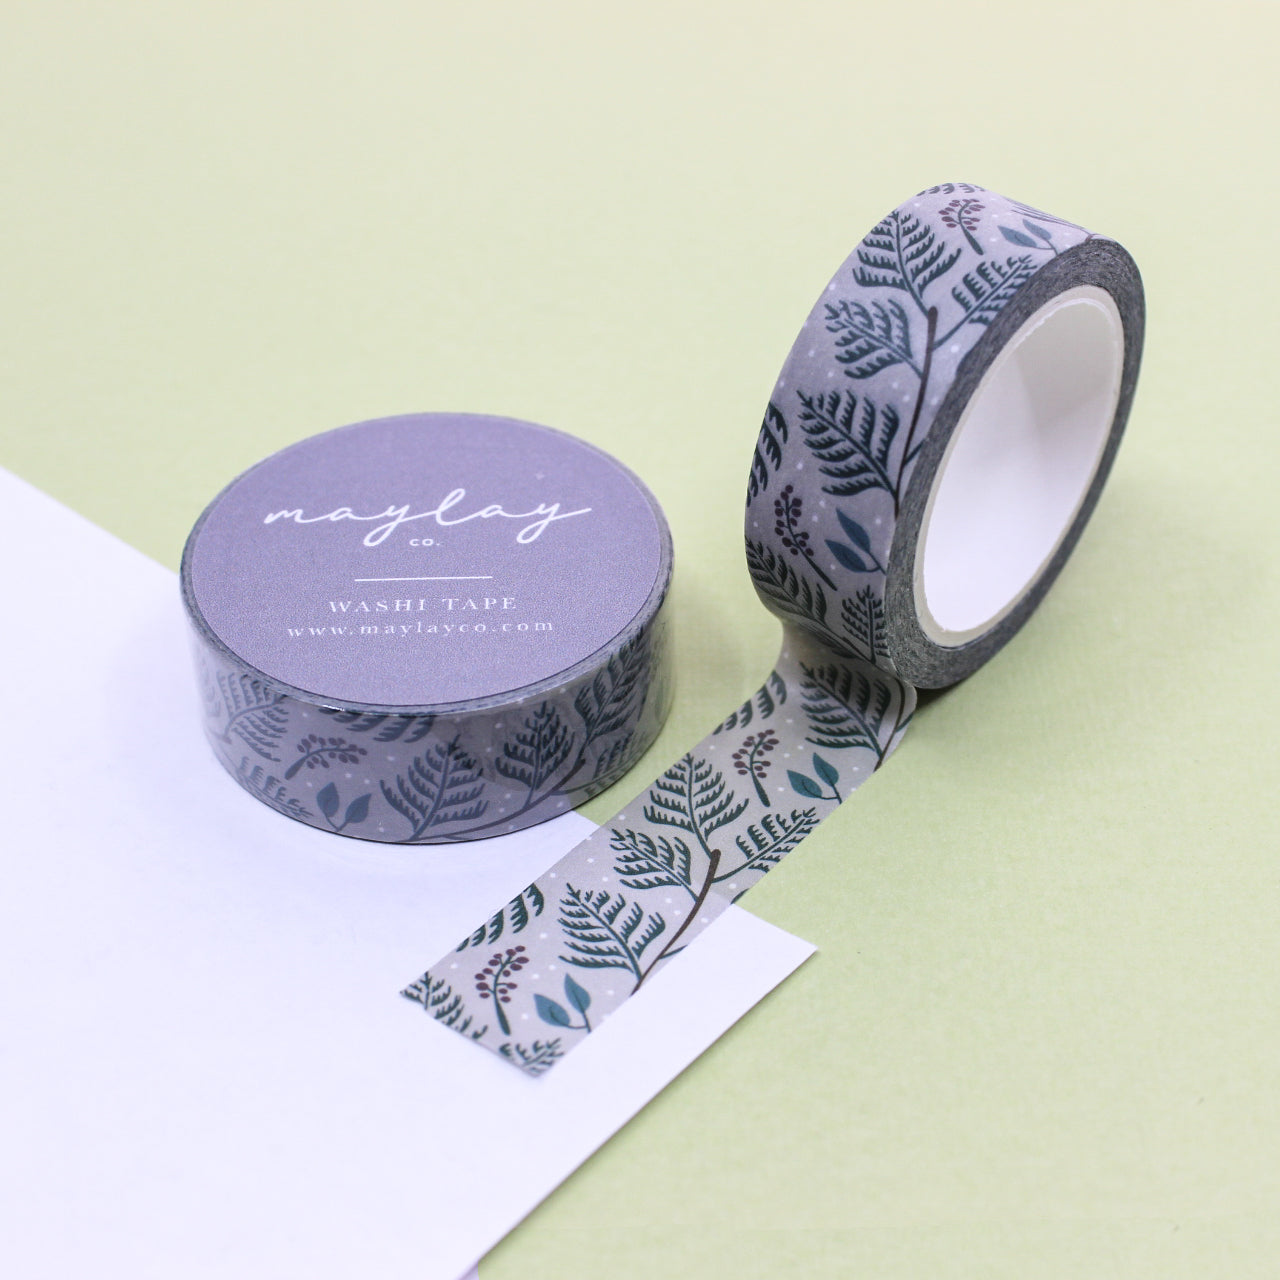 Festive Winter Tree Branches Washi Tape, a delightful blend of whimsical holiday charm and snowy branches, perfect for adding a touch of winter magic to your festive crafts and decorations. This tape is from Maylay Co and sold at BBB Supplies Craft Shop.